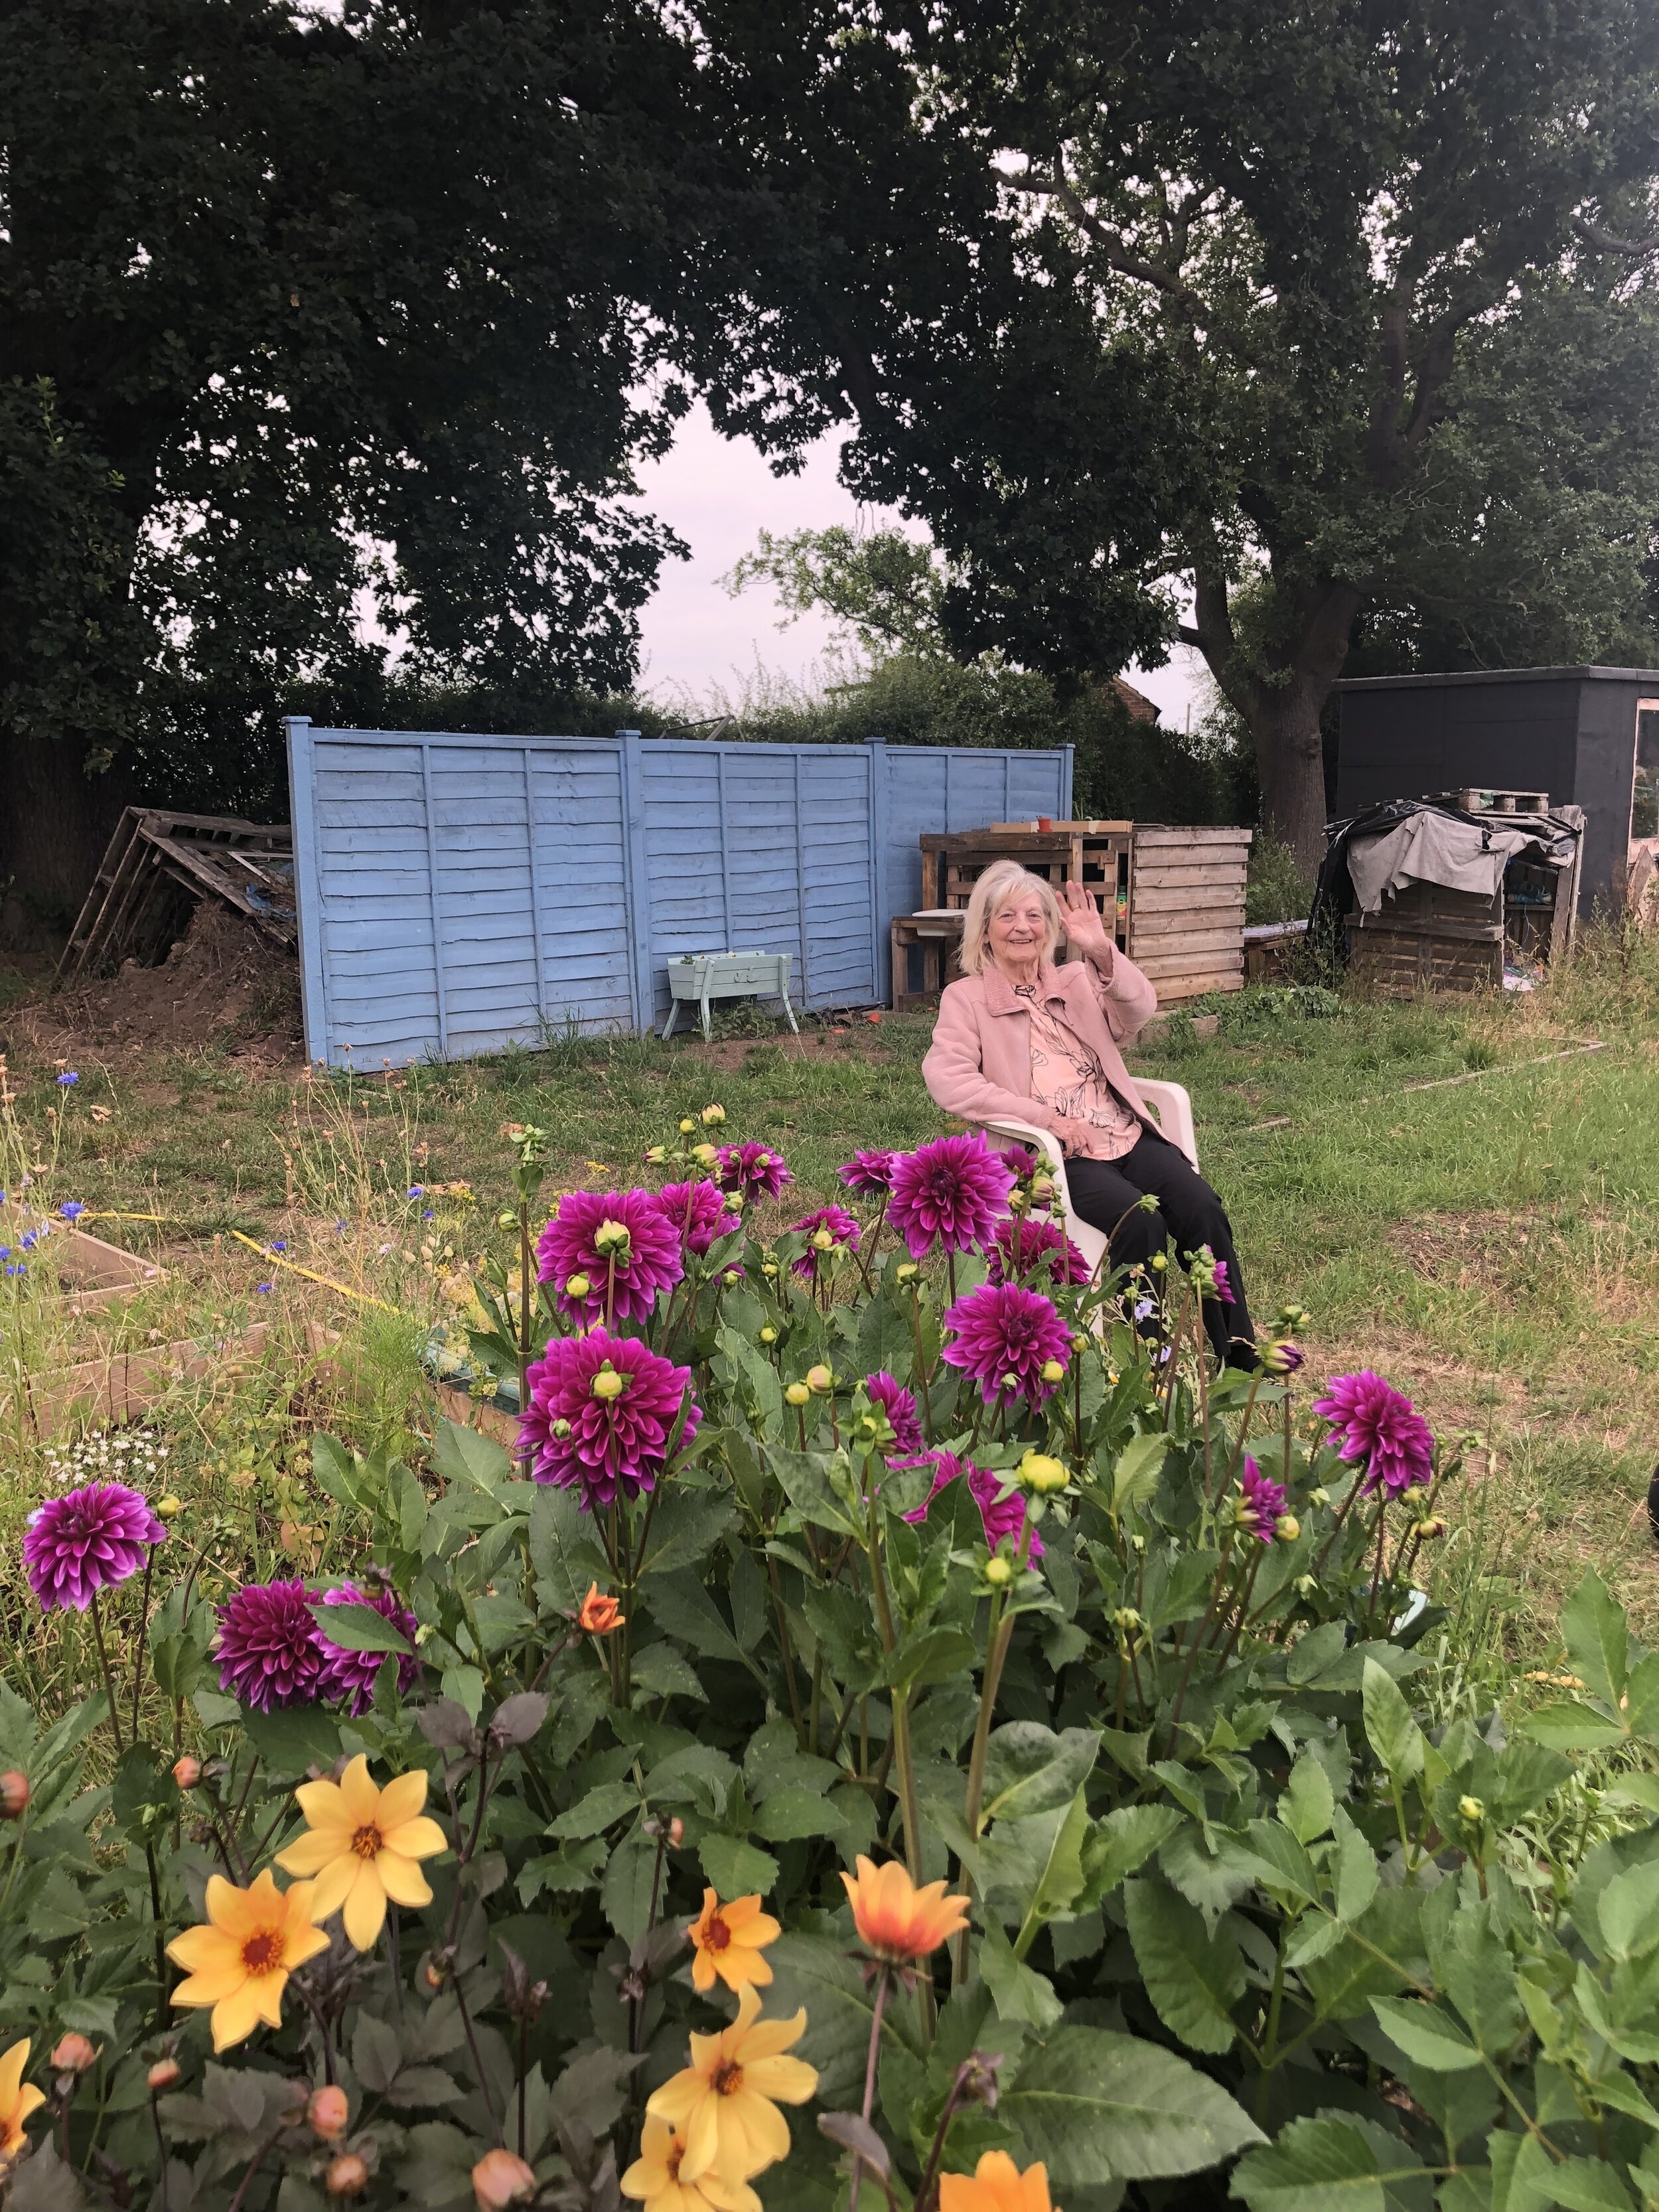 Nanny May in her element - August 2019